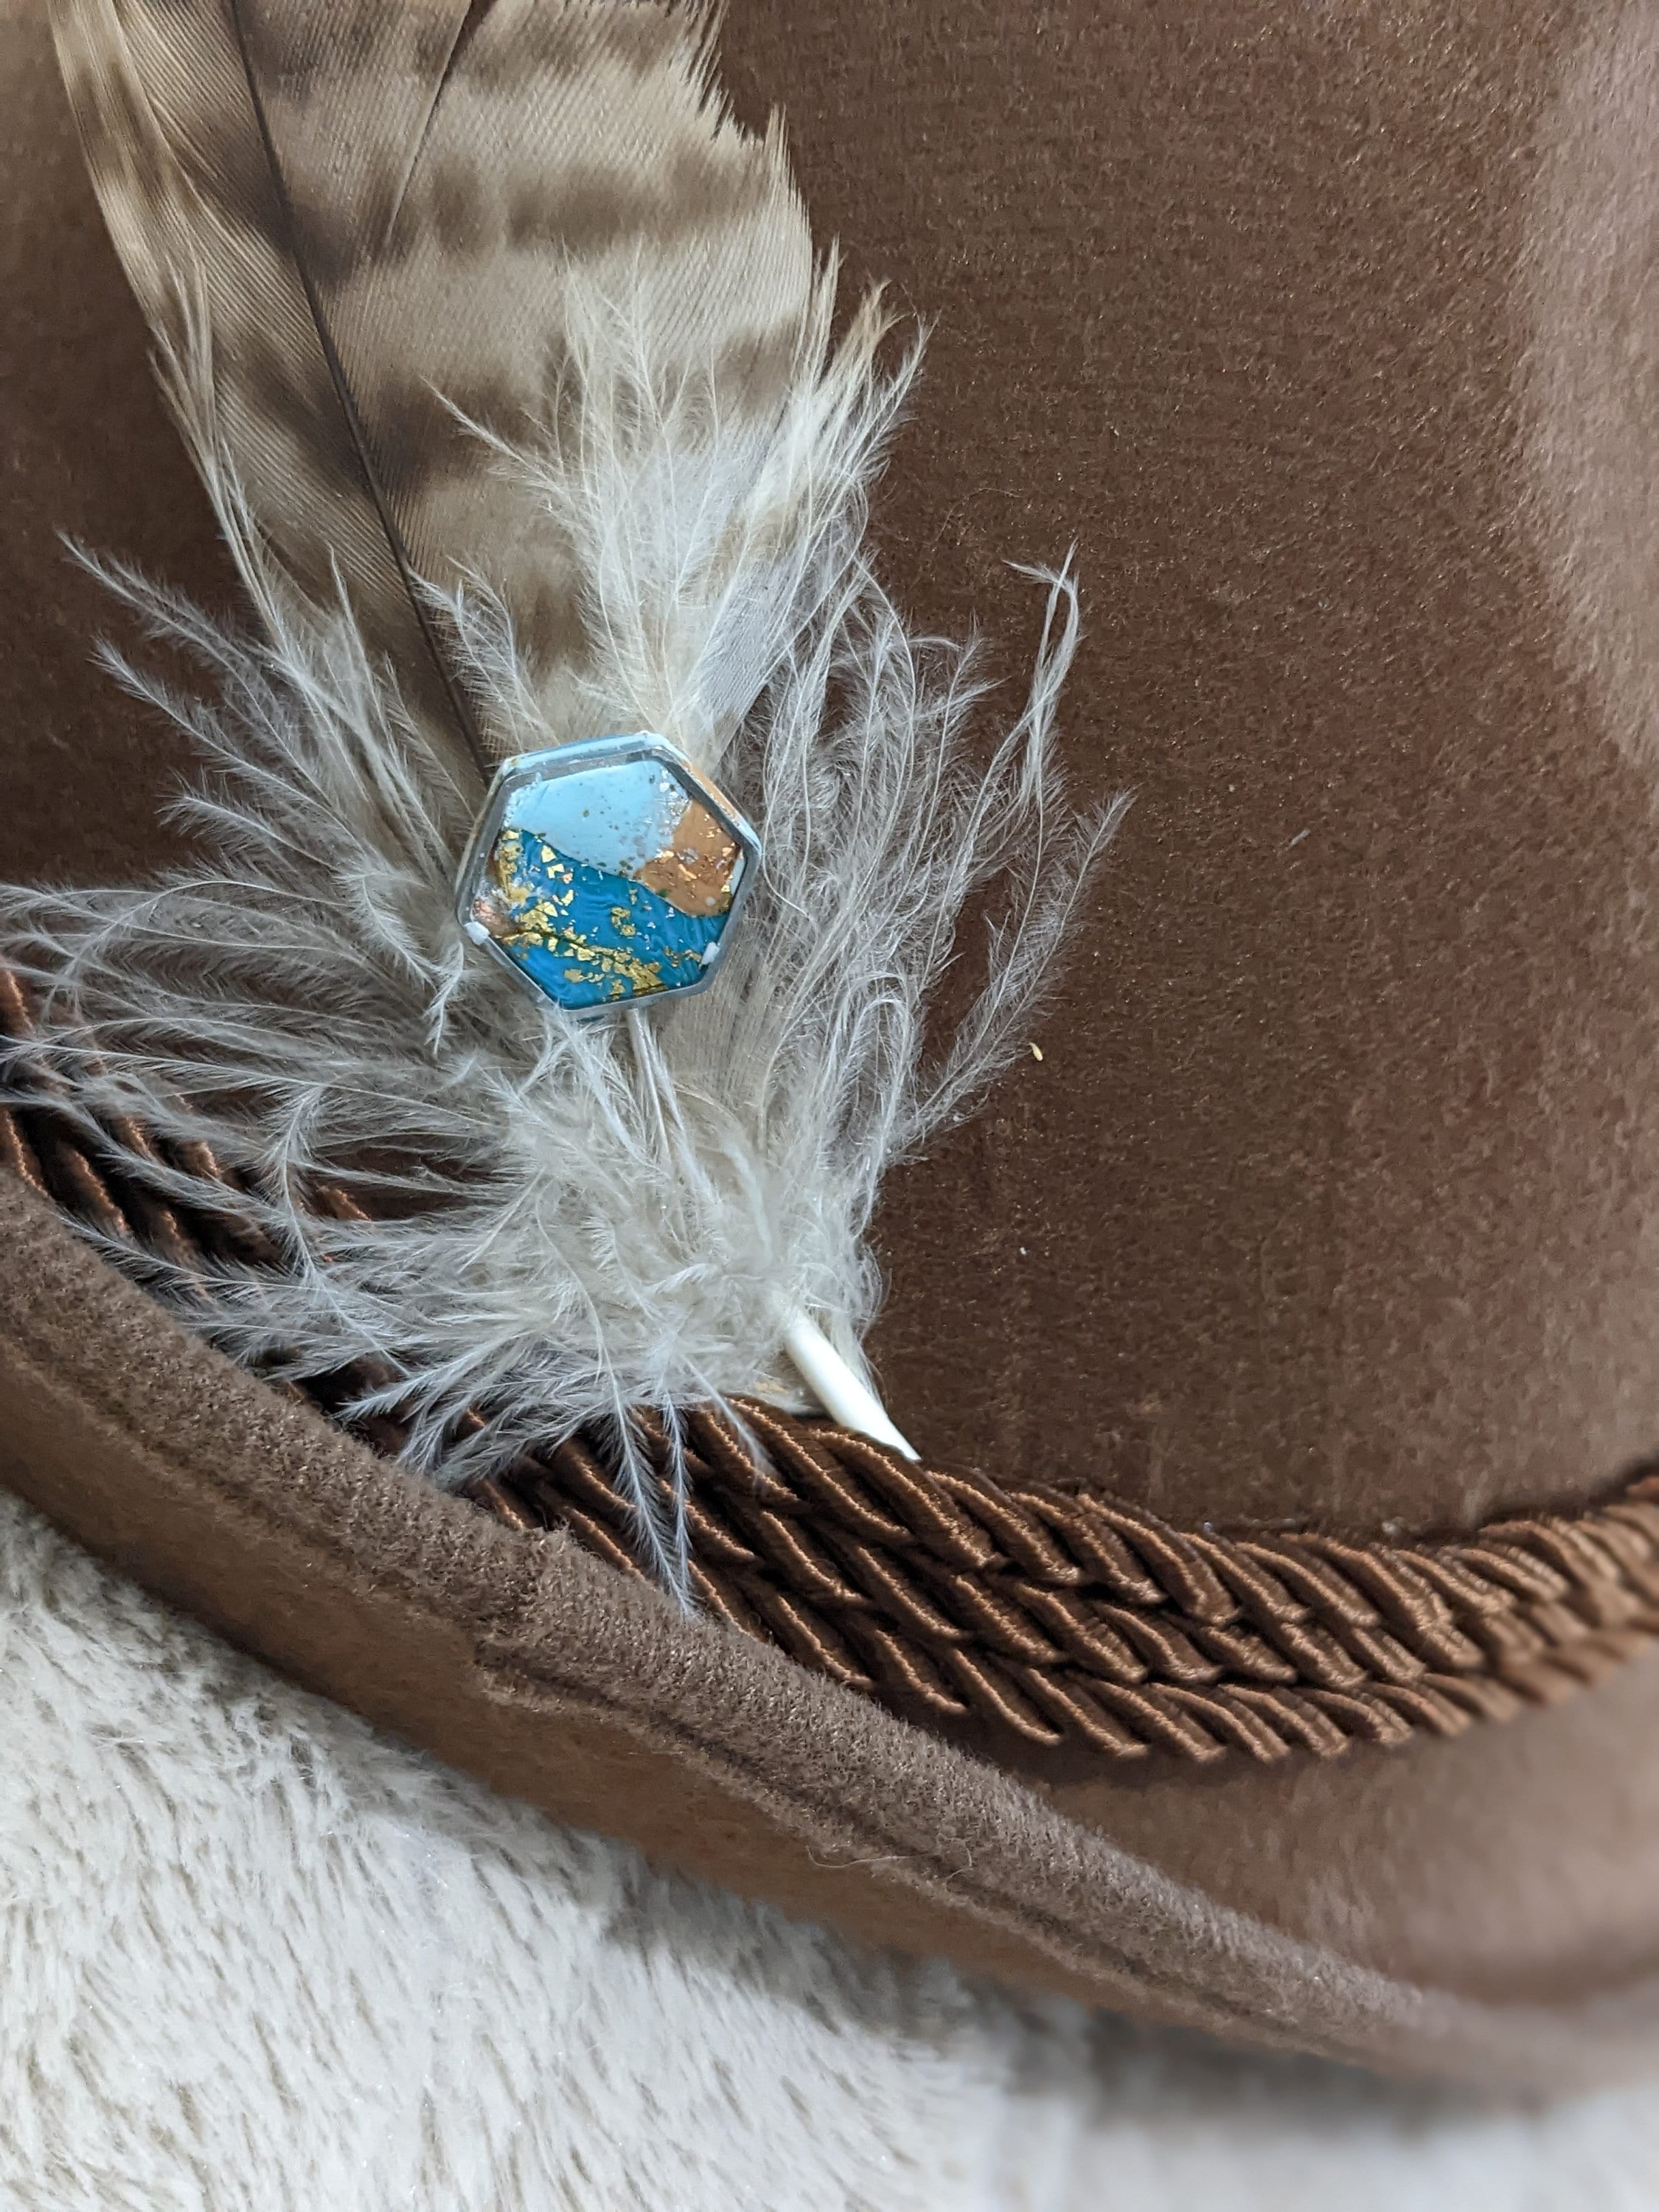 Hat Pins! Update your favorite hat. Pin to shirt, jacket, purse or